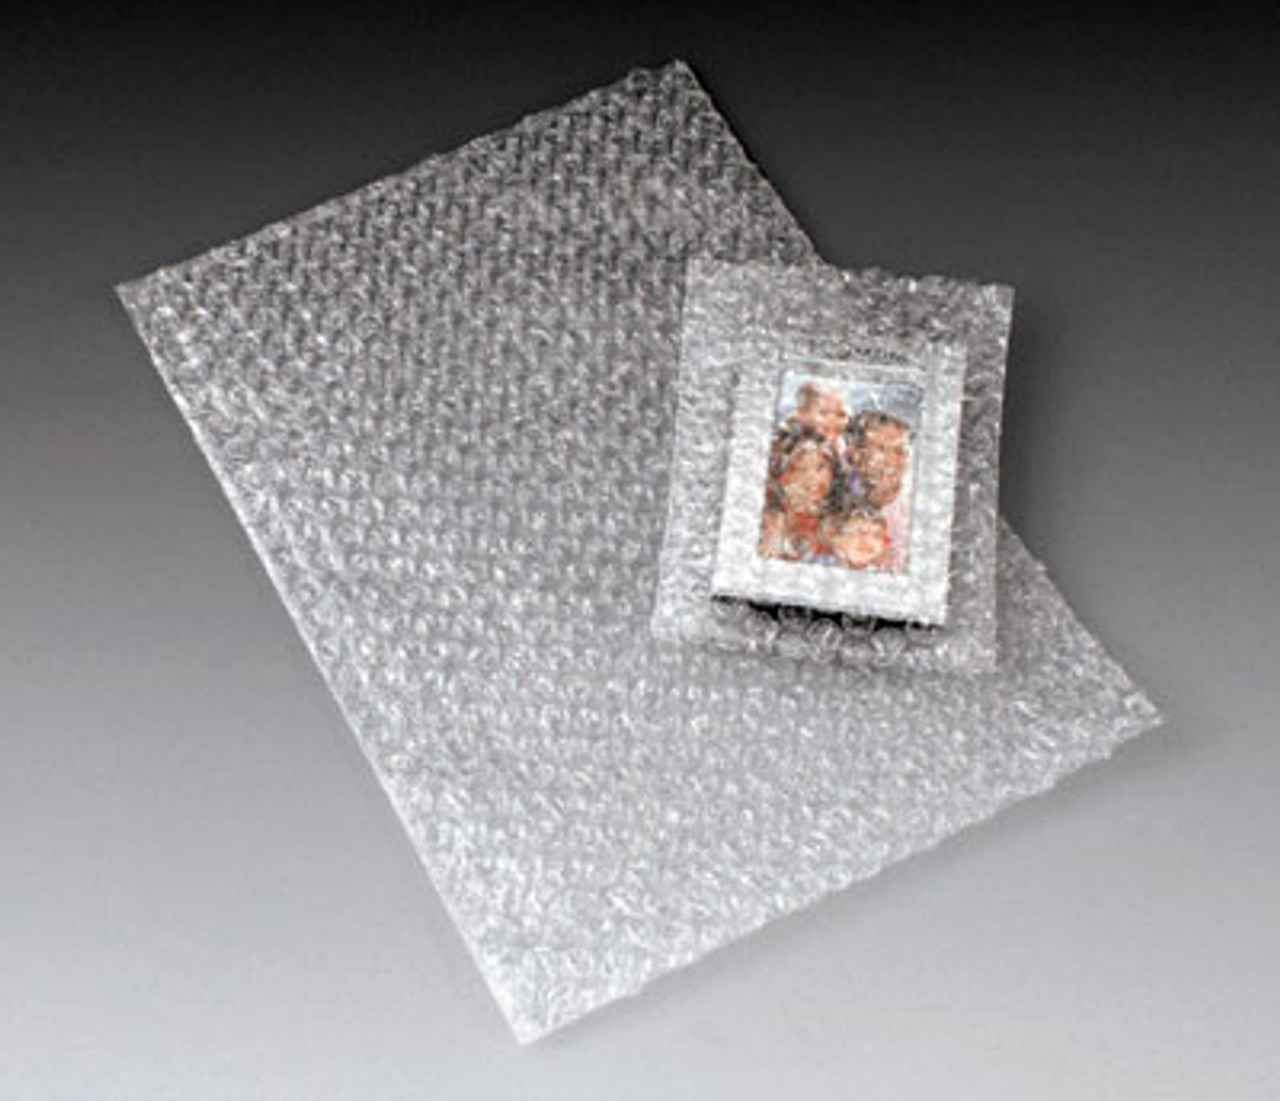 Flush Cut Sealed Air Bubble Wrap Brand Bag (3/16") (Sold by the carton)